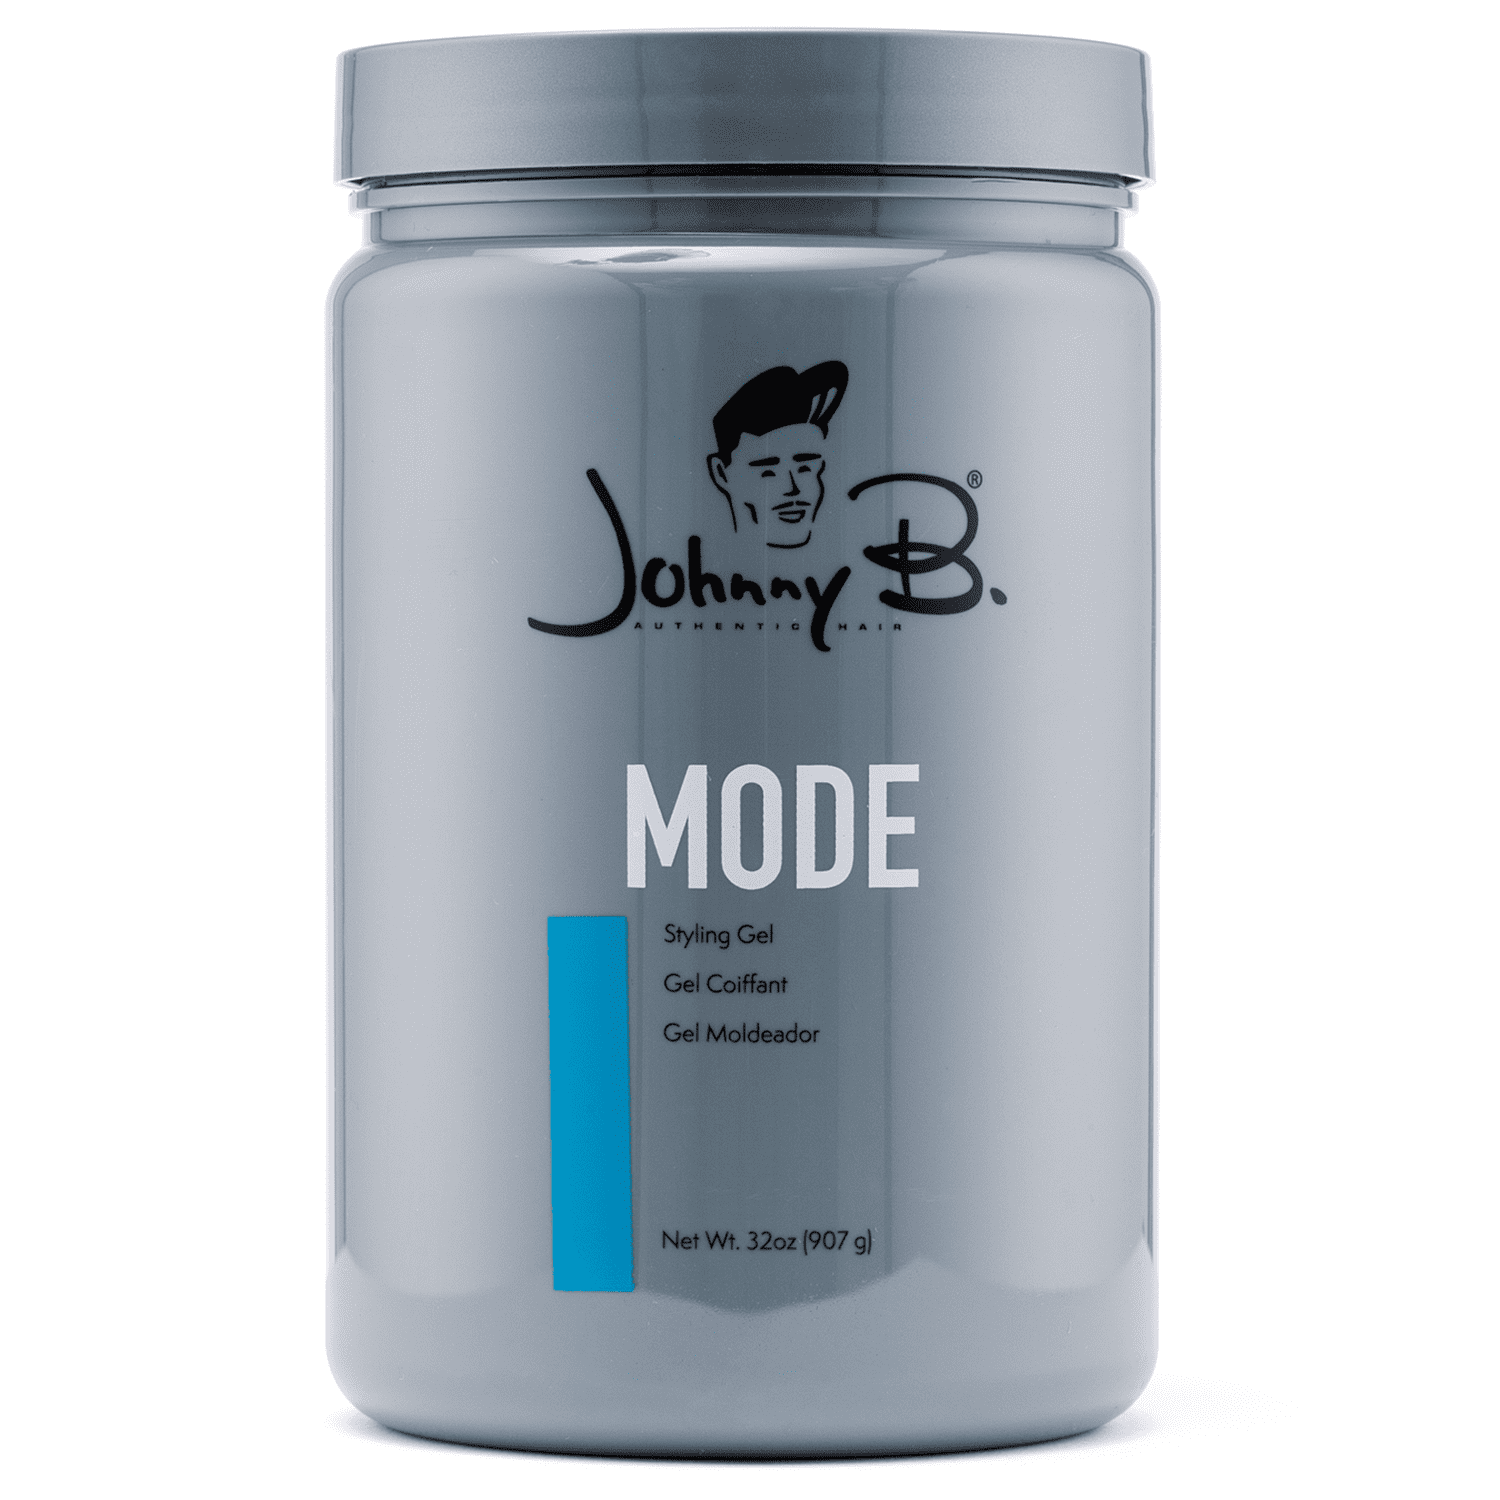 Johnny B Mode Hair Styling Gel for Men, Alcohol-Free, Water Soluble, 32 oz.